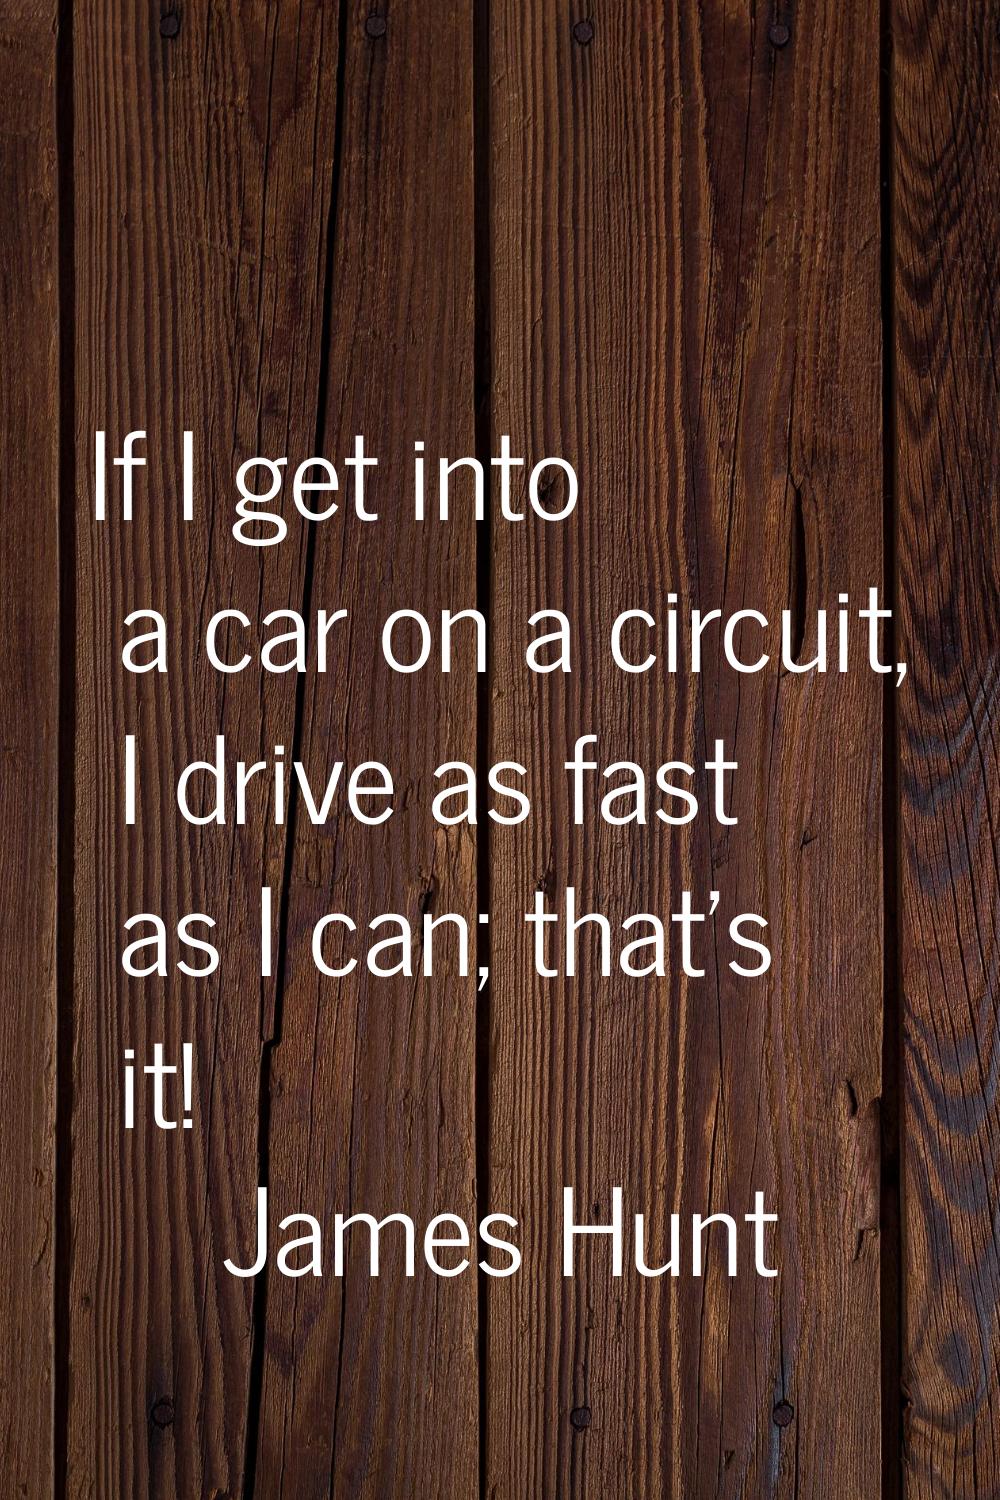 If I get into a car on a circuit, I drive as fast as I can; that's it!